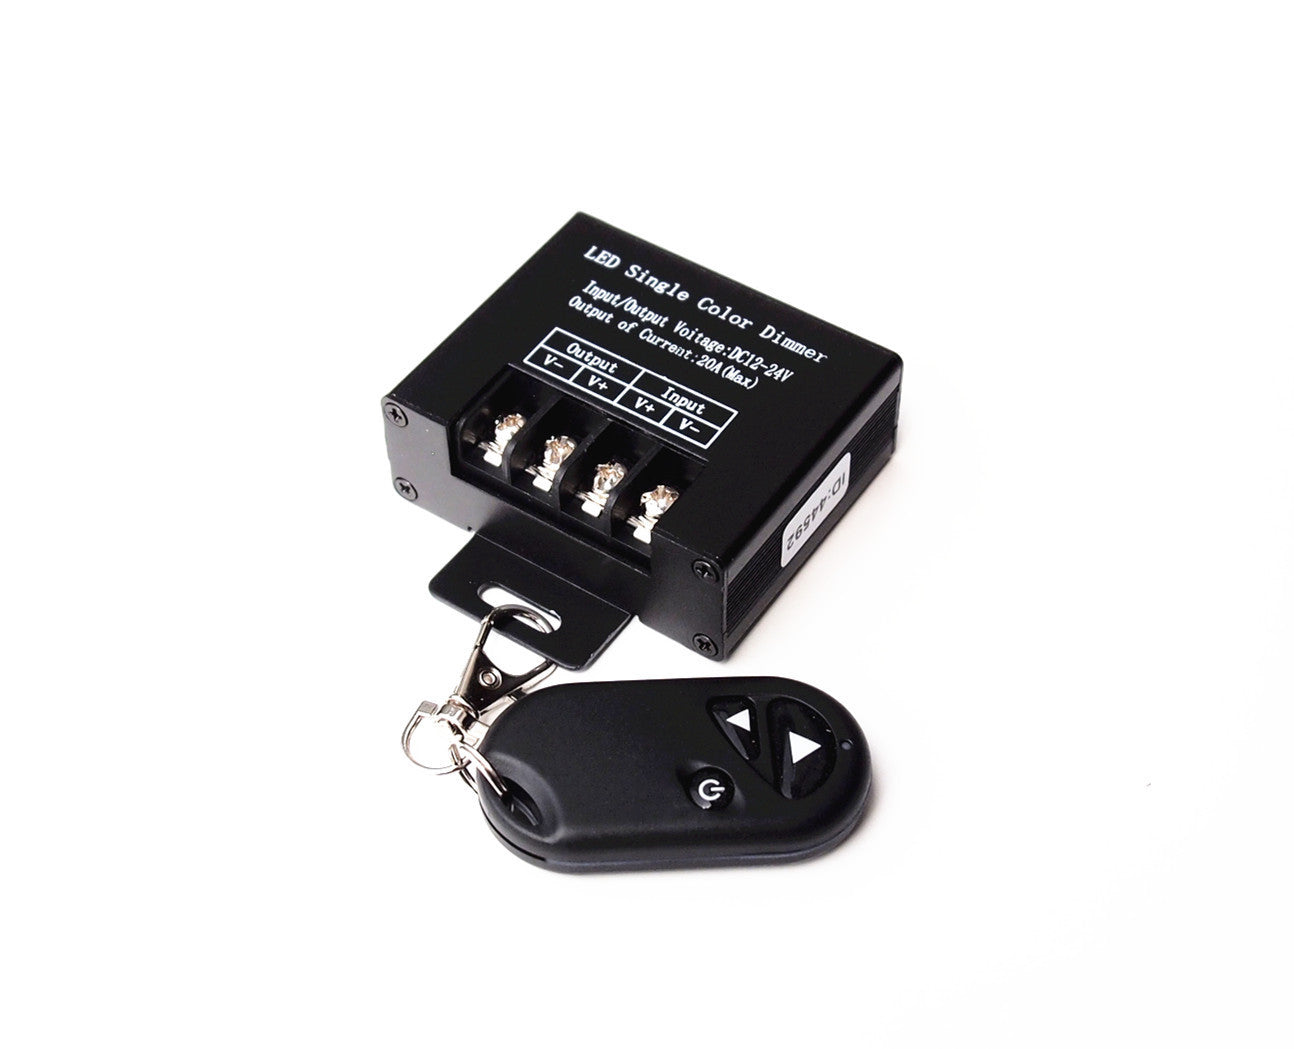 Wireless Dimmer Switch & Receiver Kit for LED Lights